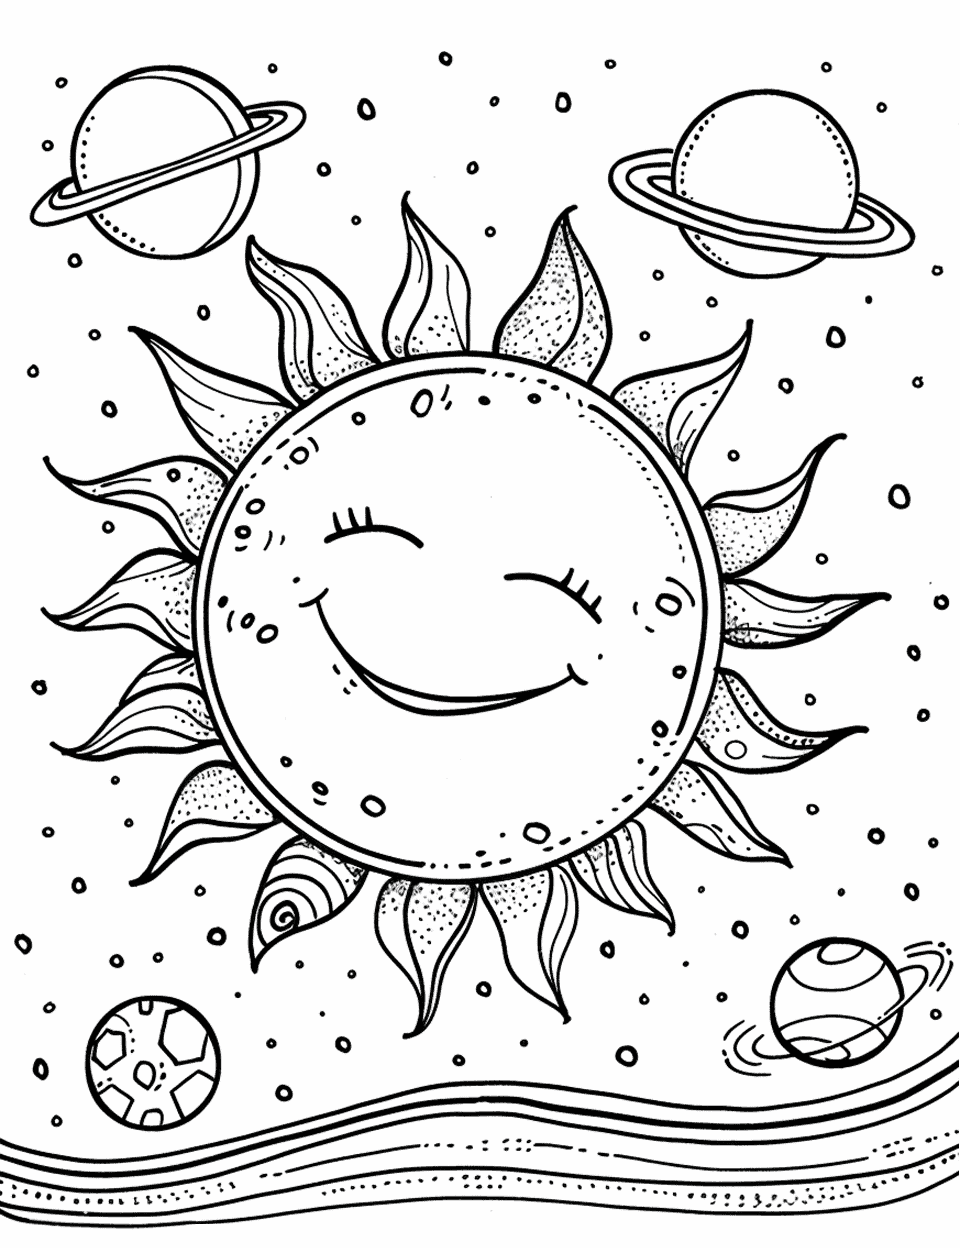 Solar System Exploration Sun Coloring Page - Planets orbiting around a large, smiling sun in the center.